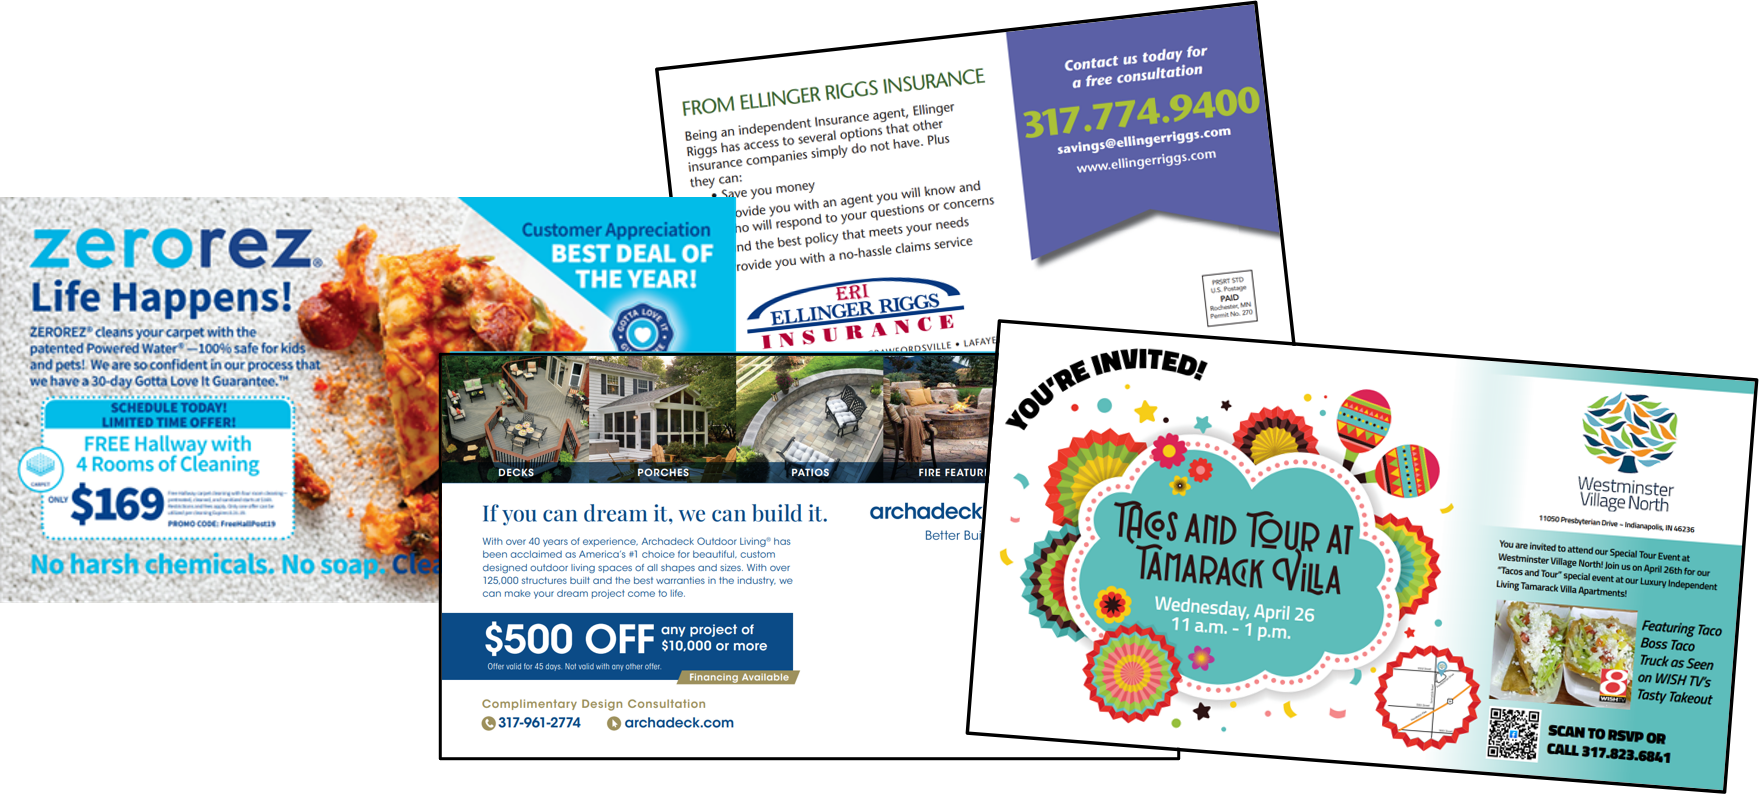 Print Media Advertising Indianapolis | Direct Mail Marketing Agency ...